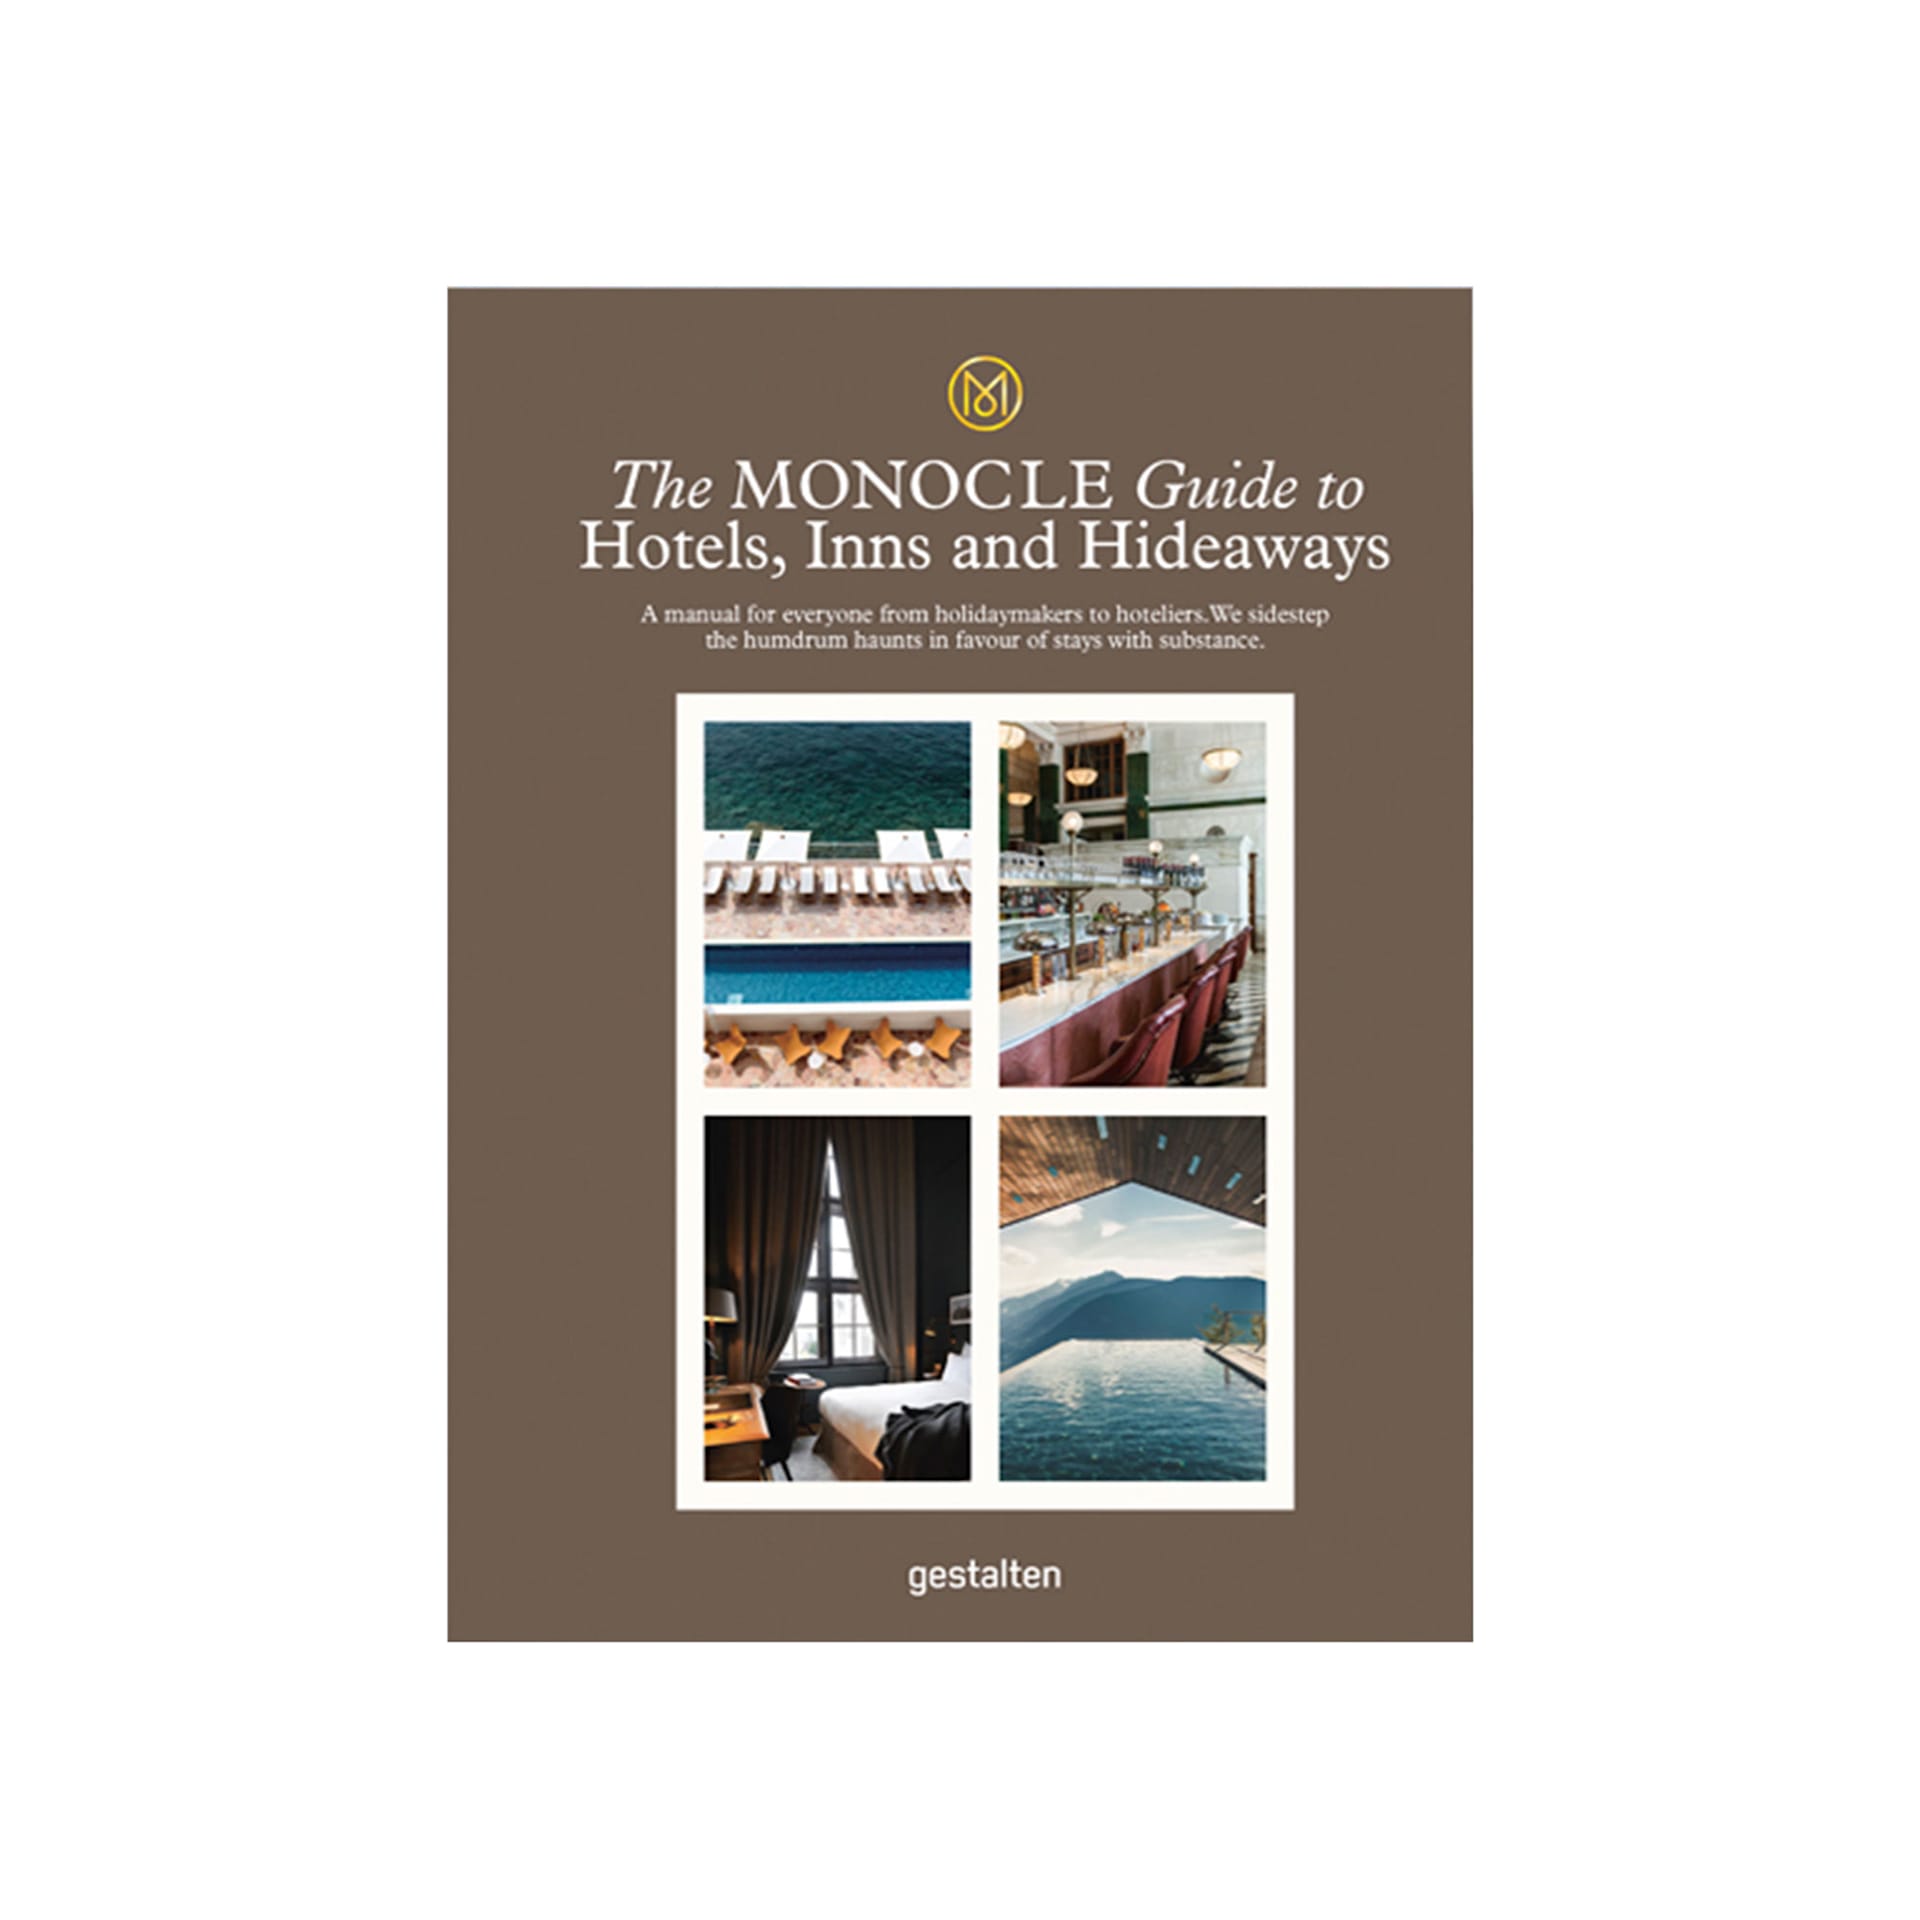 The Monocle Guide To Hotels, Inns and Hideaways - New Mags - NO GA